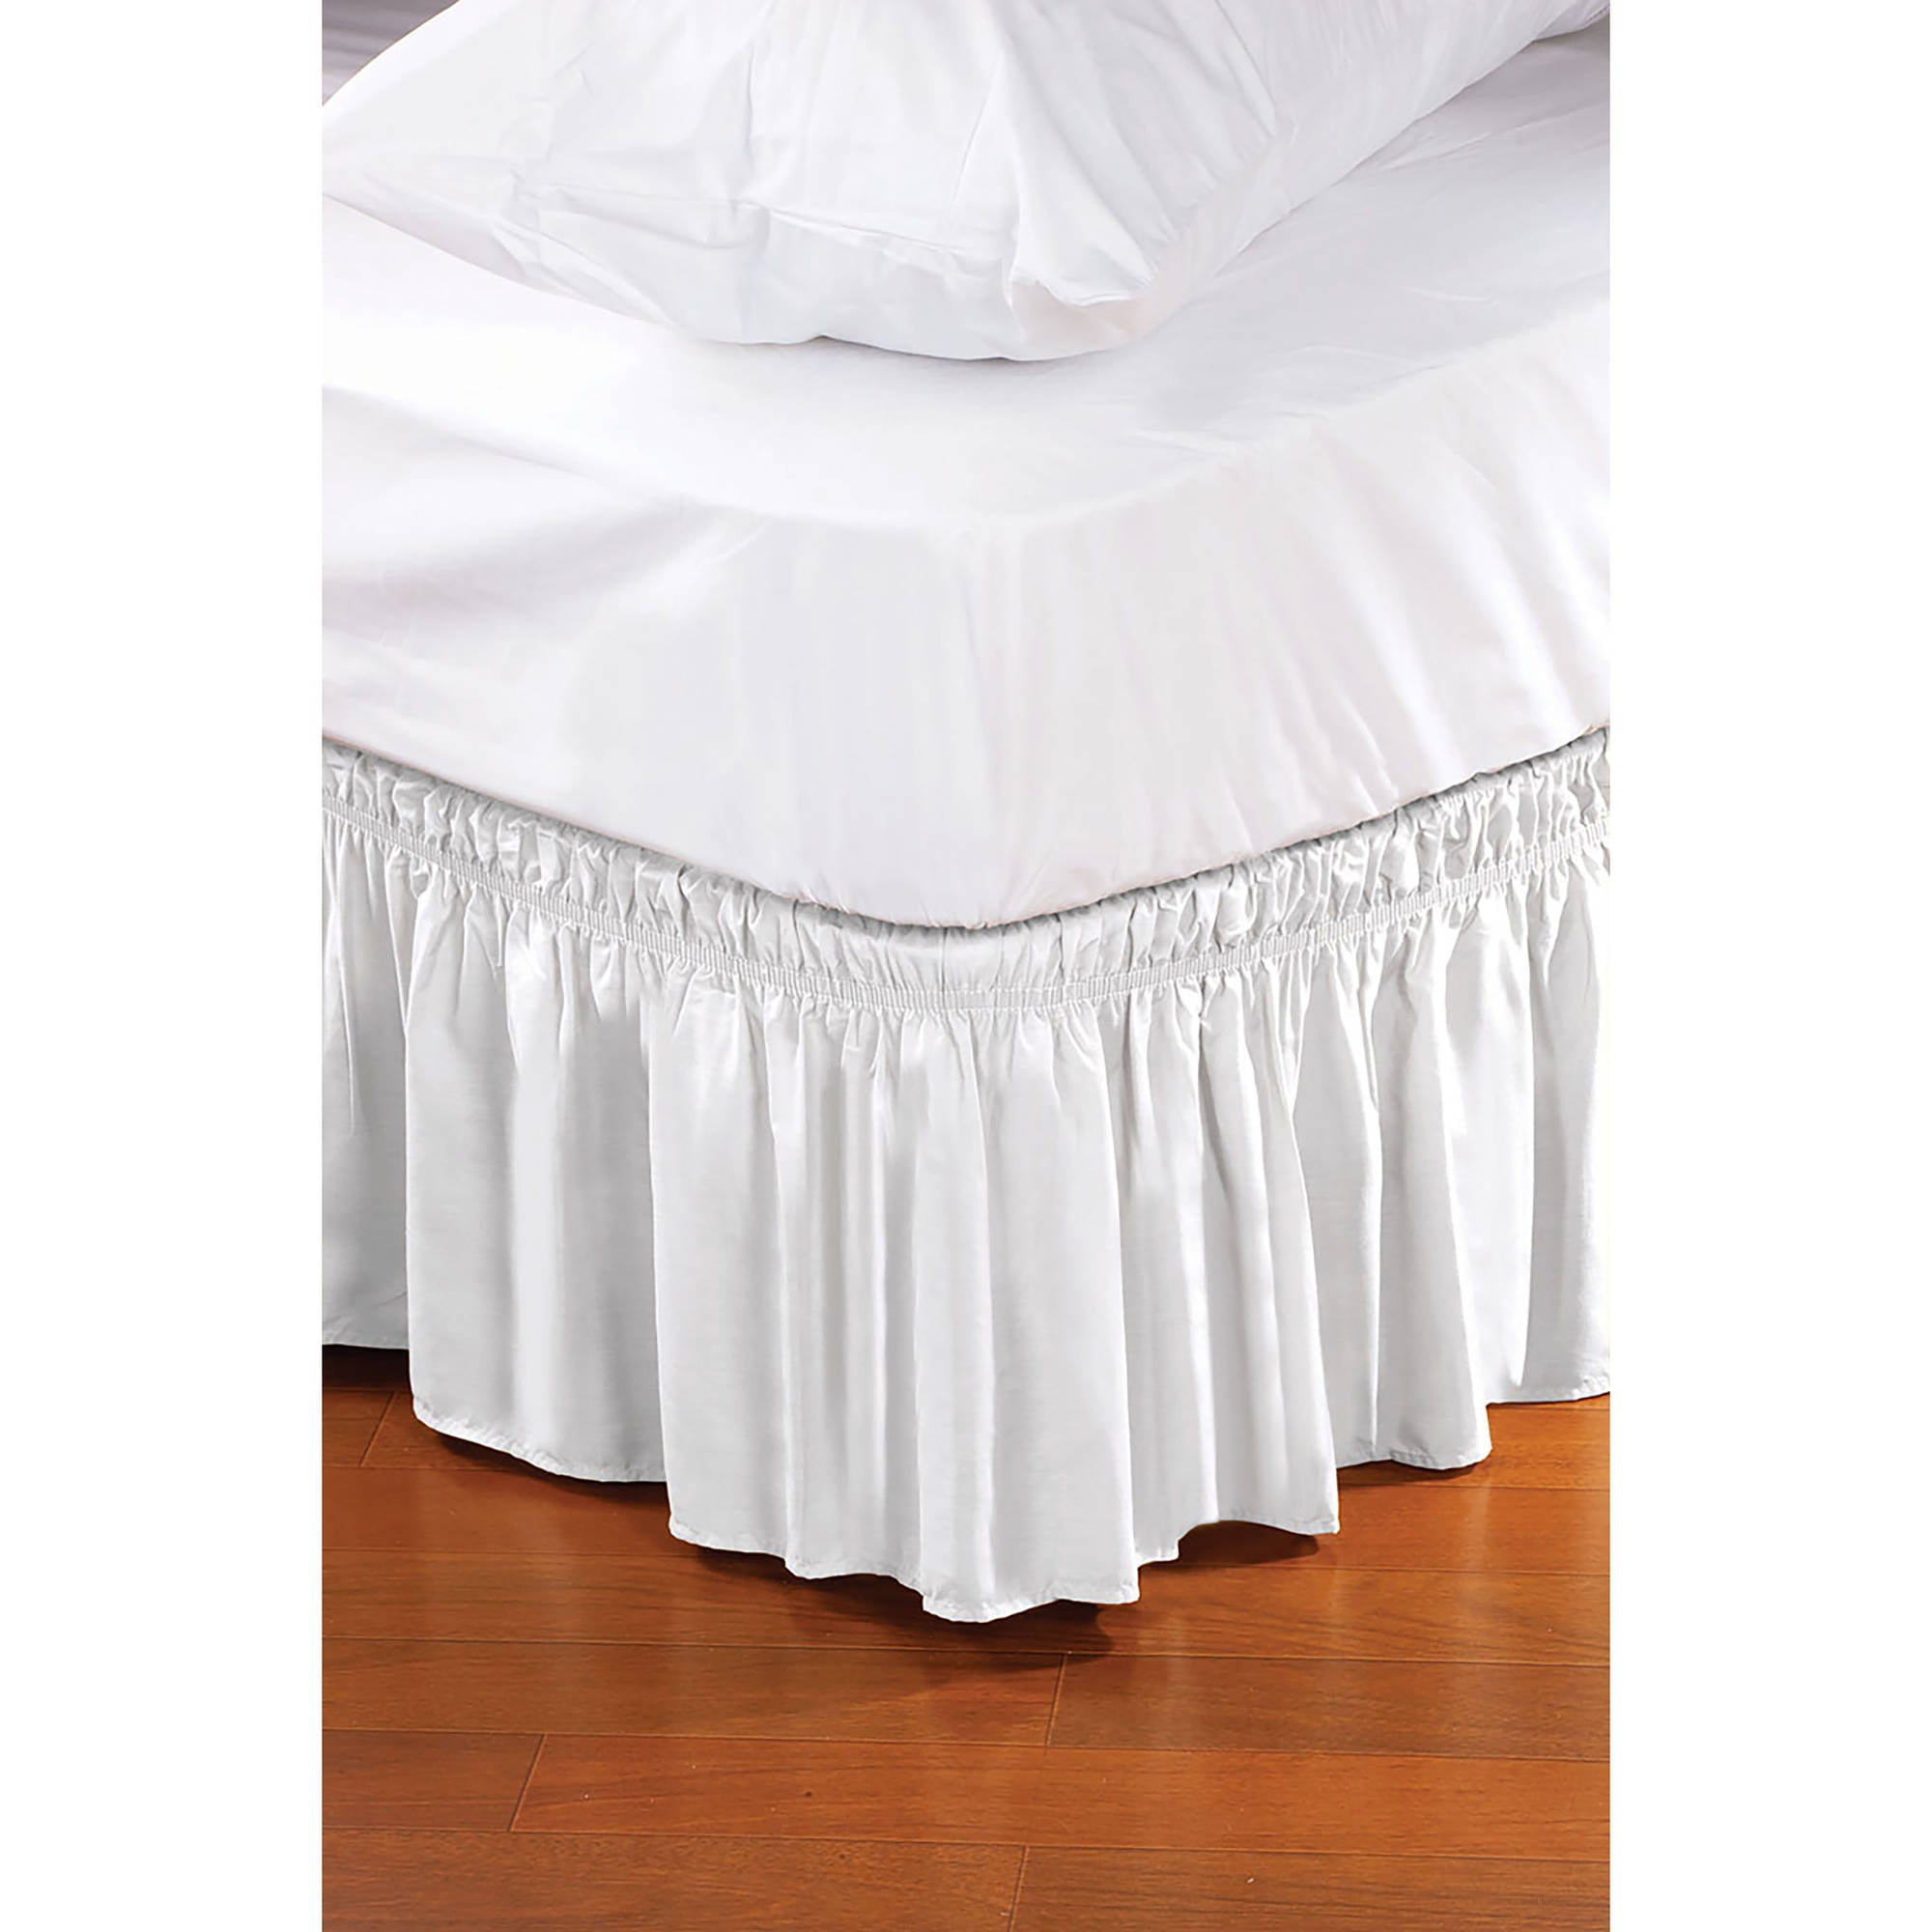 Home Details Wrap Around Bed Ruffle Twin/Full in White   Walmart 